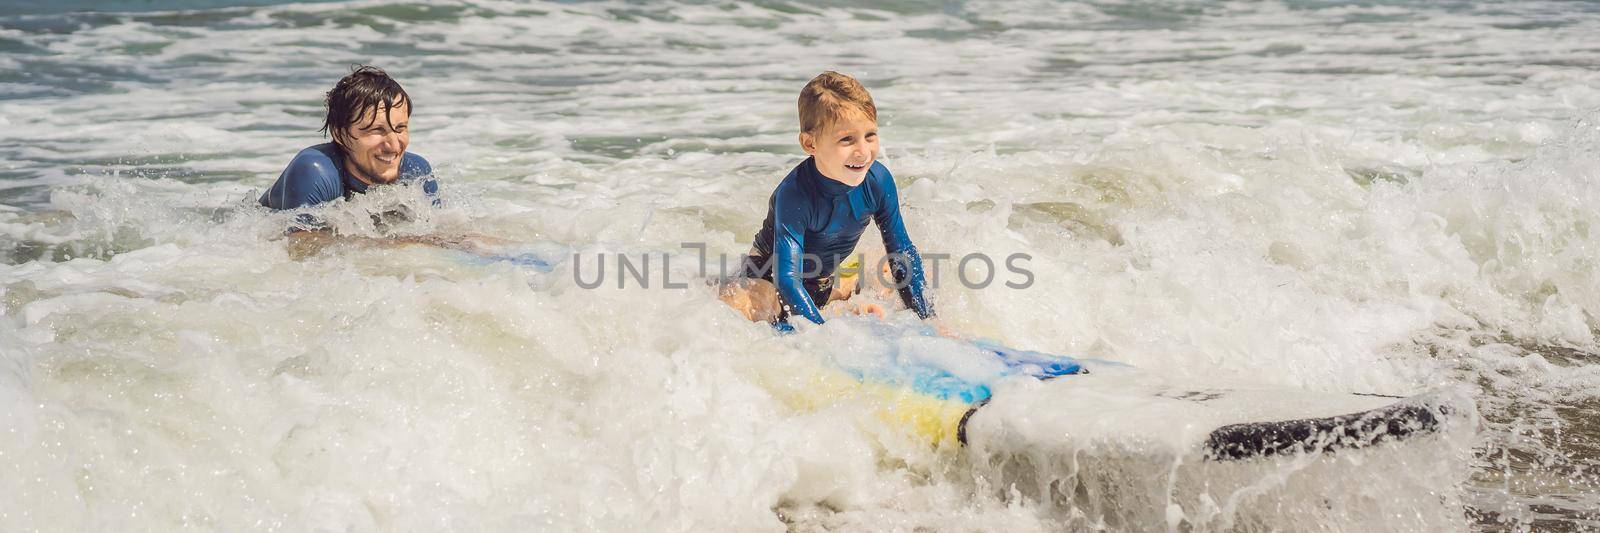 BANNER, LONG FORMAT Father or instructor teaching his 5 year old son how to surf in the sea on vacation or holiday. Travel and sports with children concept. Surfing lesson for kids by galitskaya